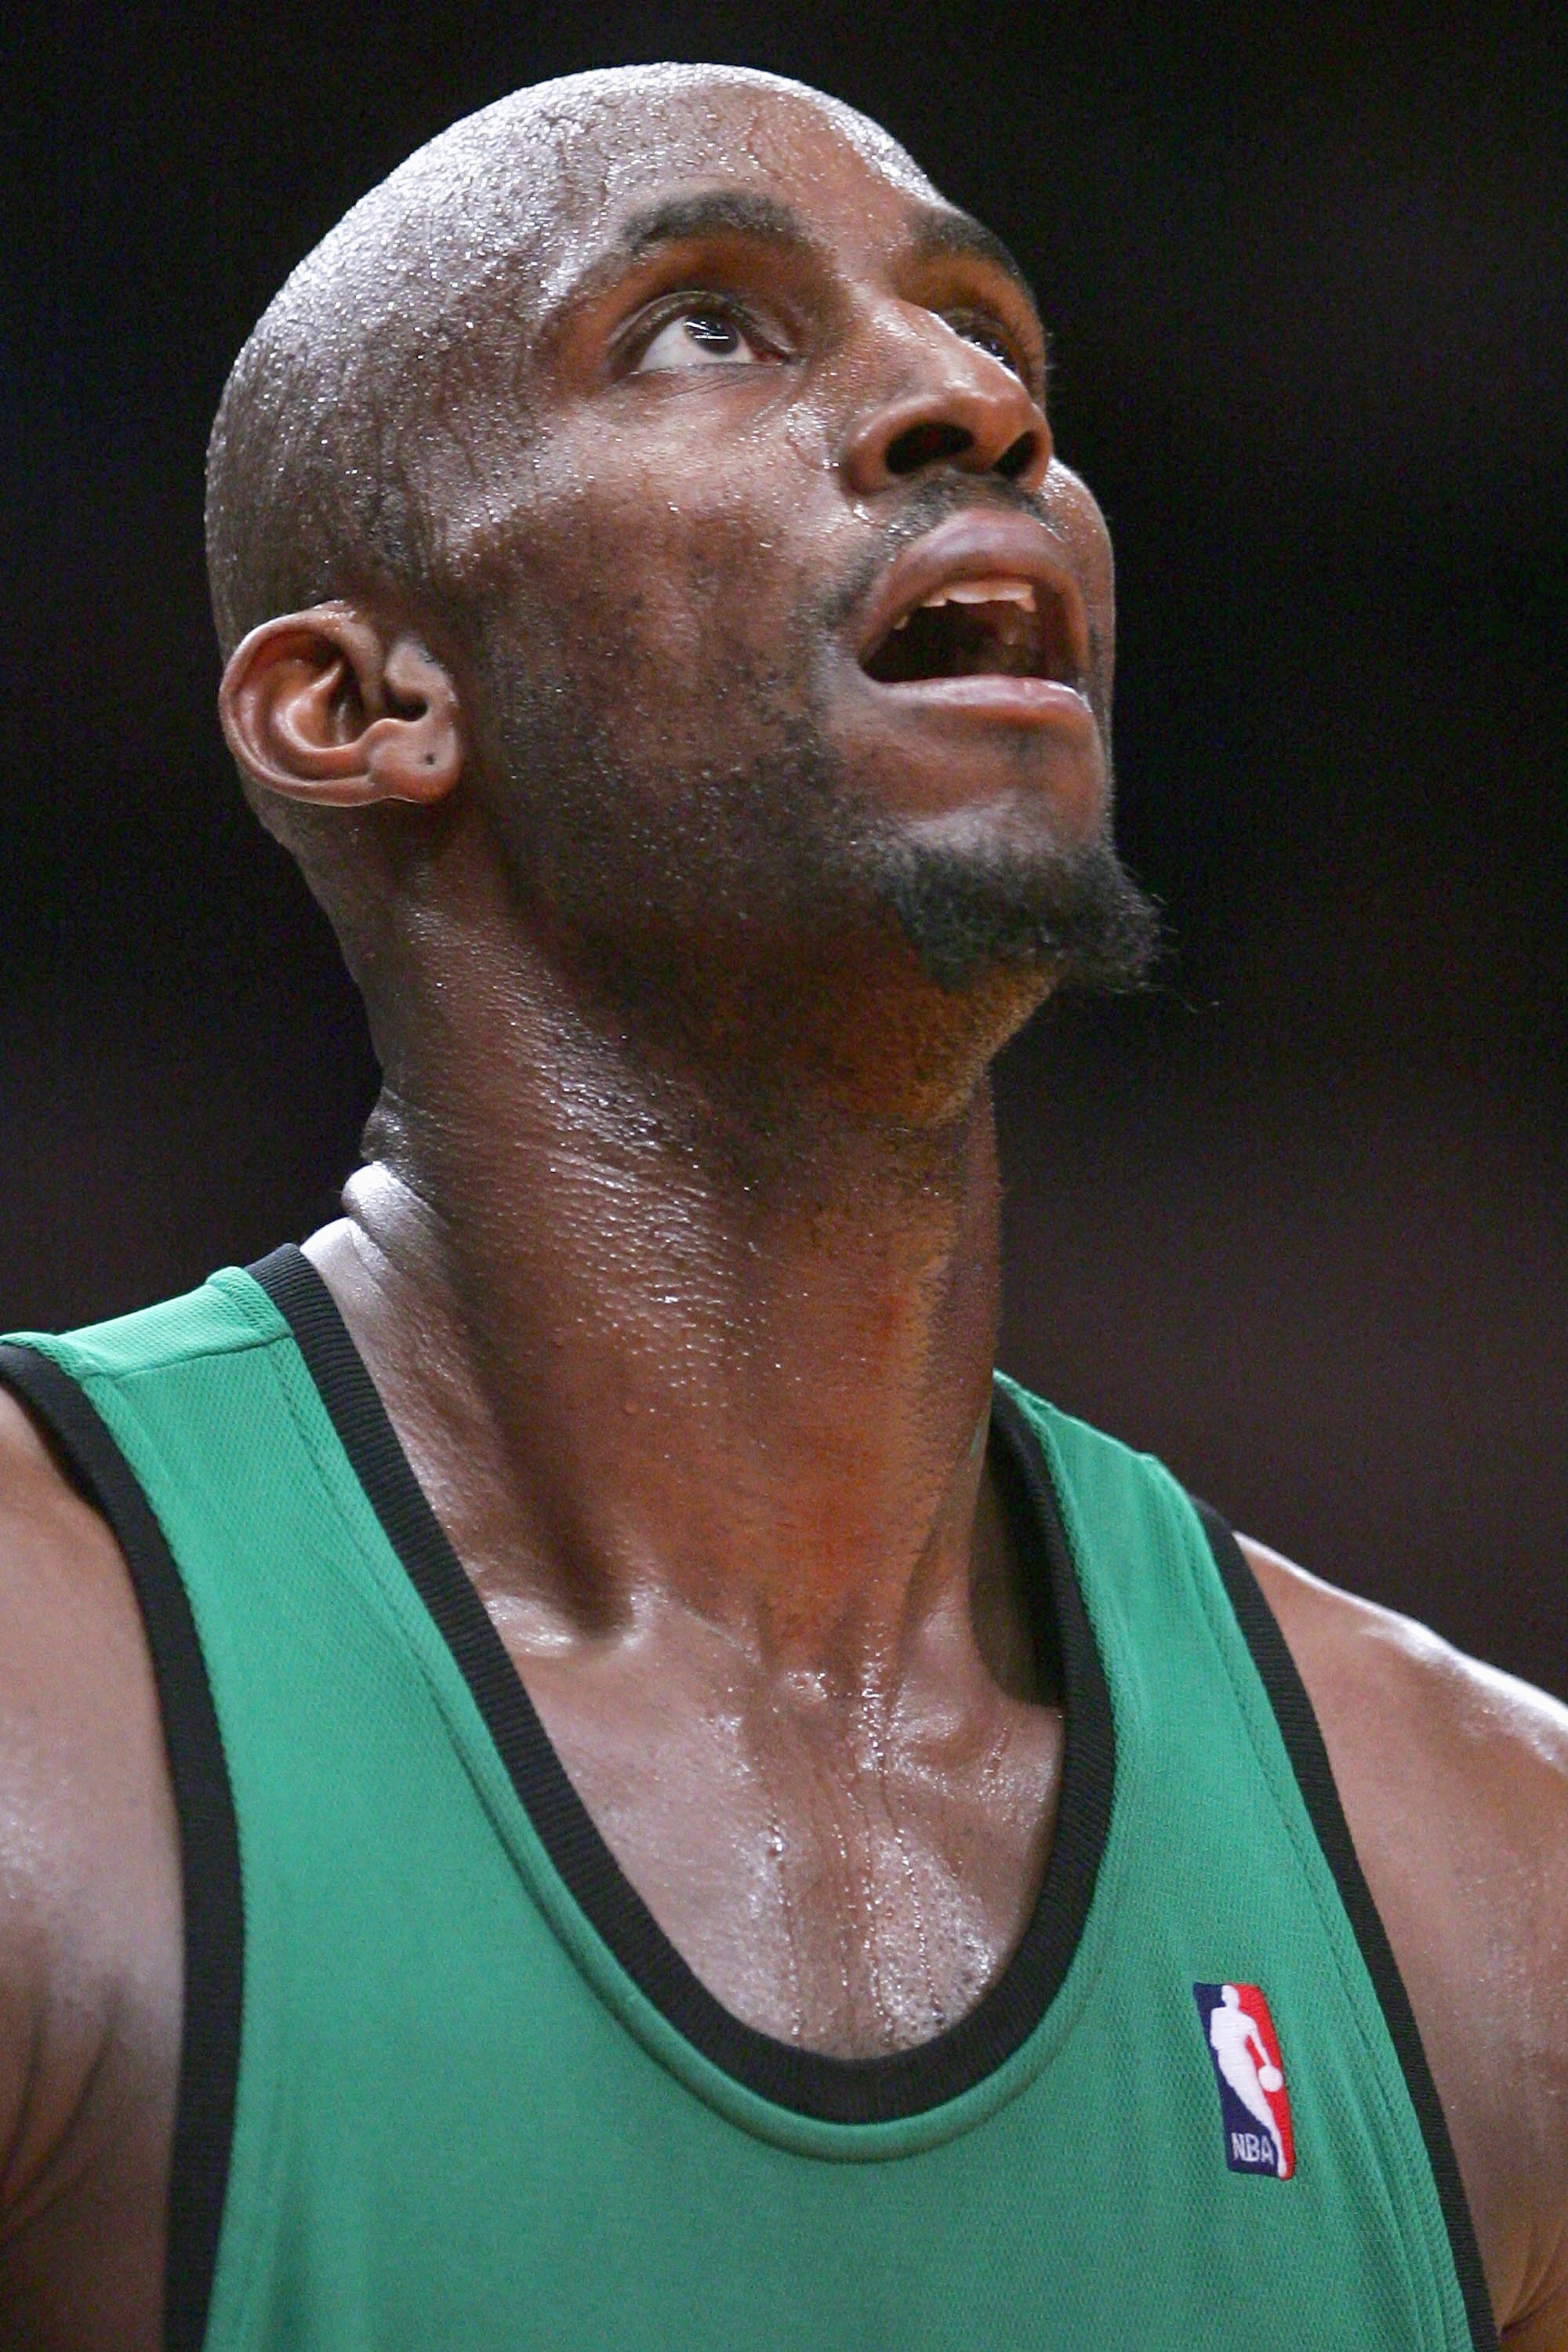 NEW YORK - FEBRUARY 06:  Kevin Garnett #5 of the Boston Celtics looks on against the New York Knicks at Madison Square Garden on February 6, 2009 in New York City. NOTE TO USER: User expressly acknowledges and agrees that, by downloading and/or using this